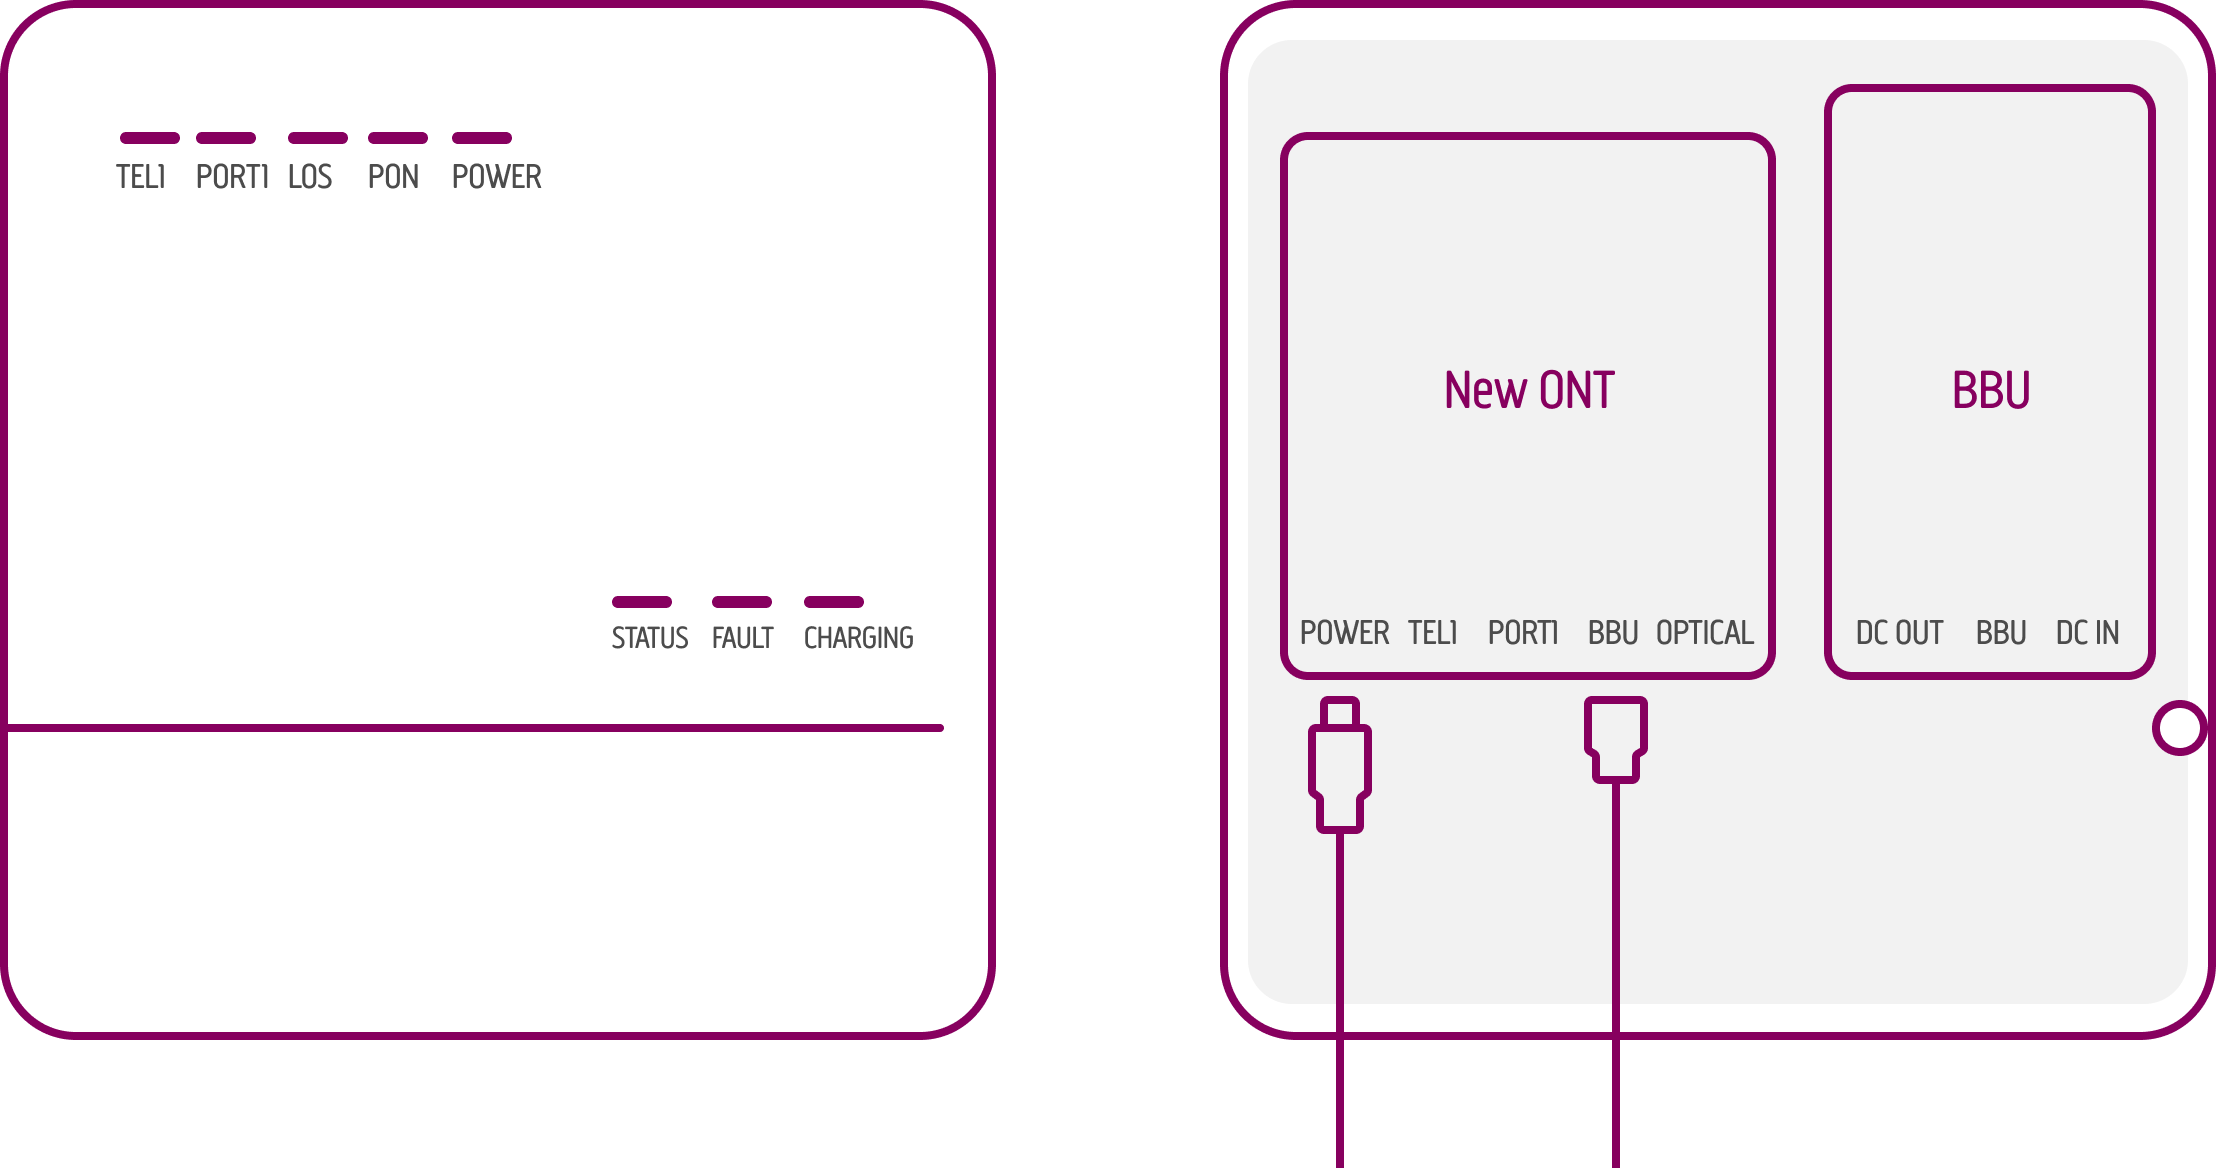 Optical Network Terminal (ONT) with cables connected to the Ethernet port and power socket